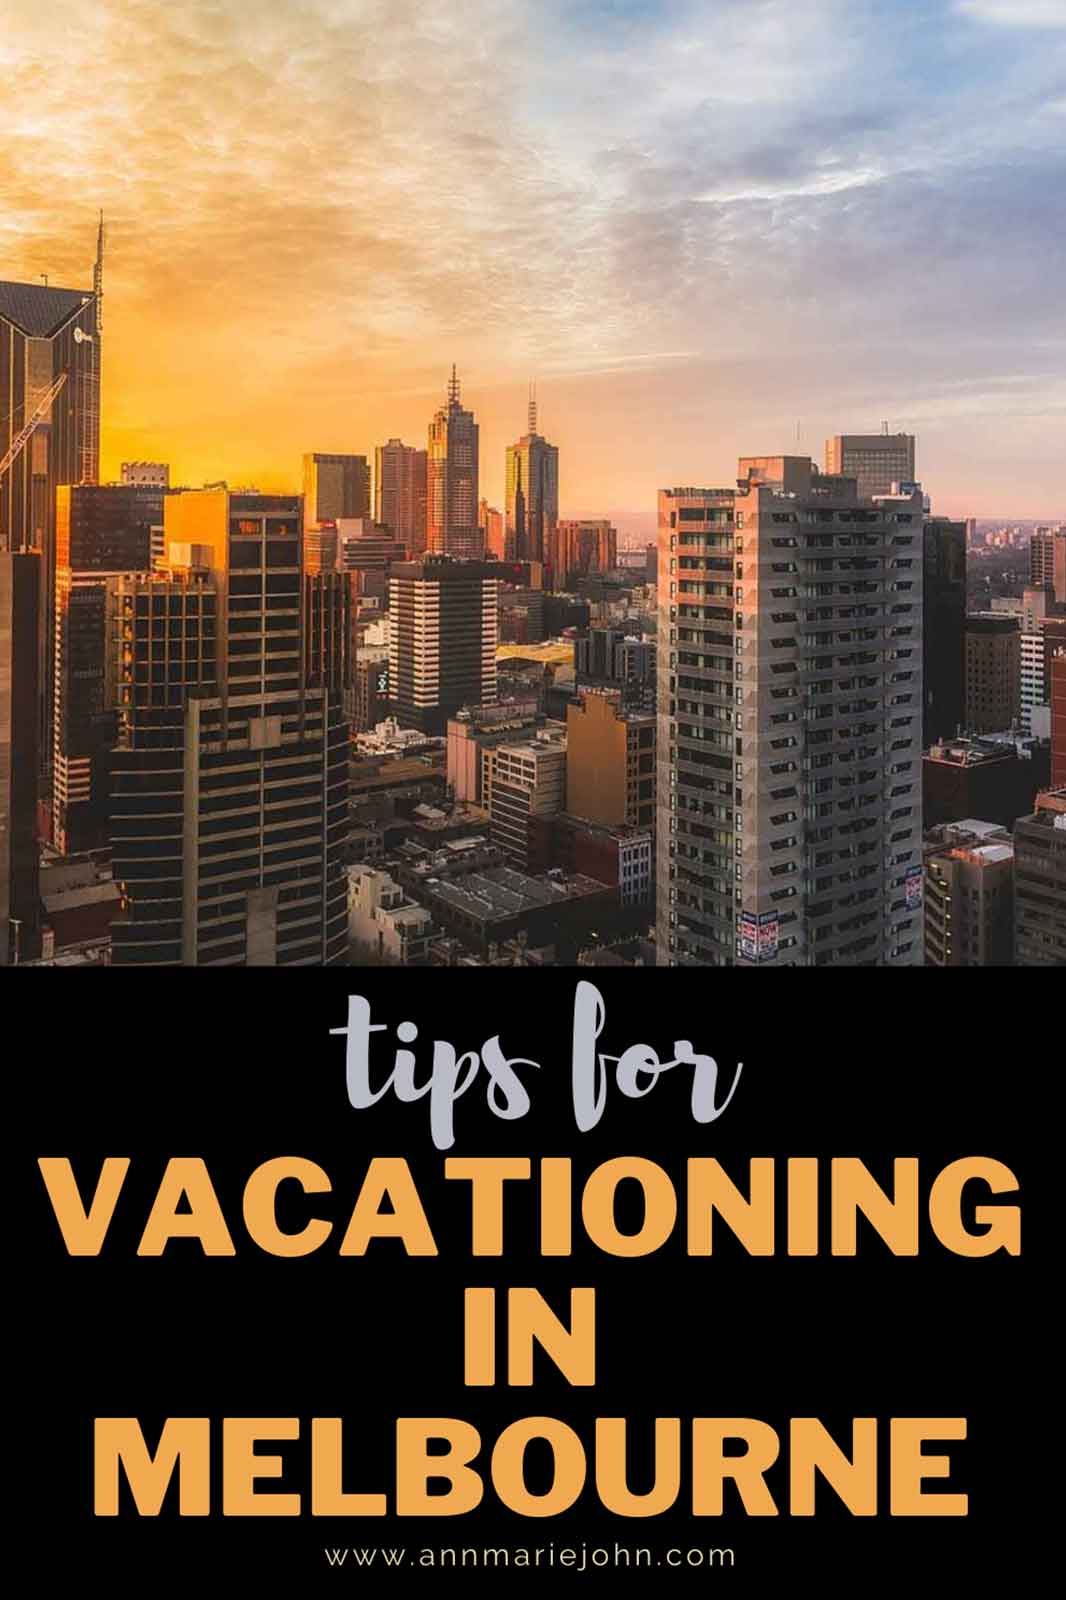 Vacationing in Melbourne - Tips for Inquisitive Travelers